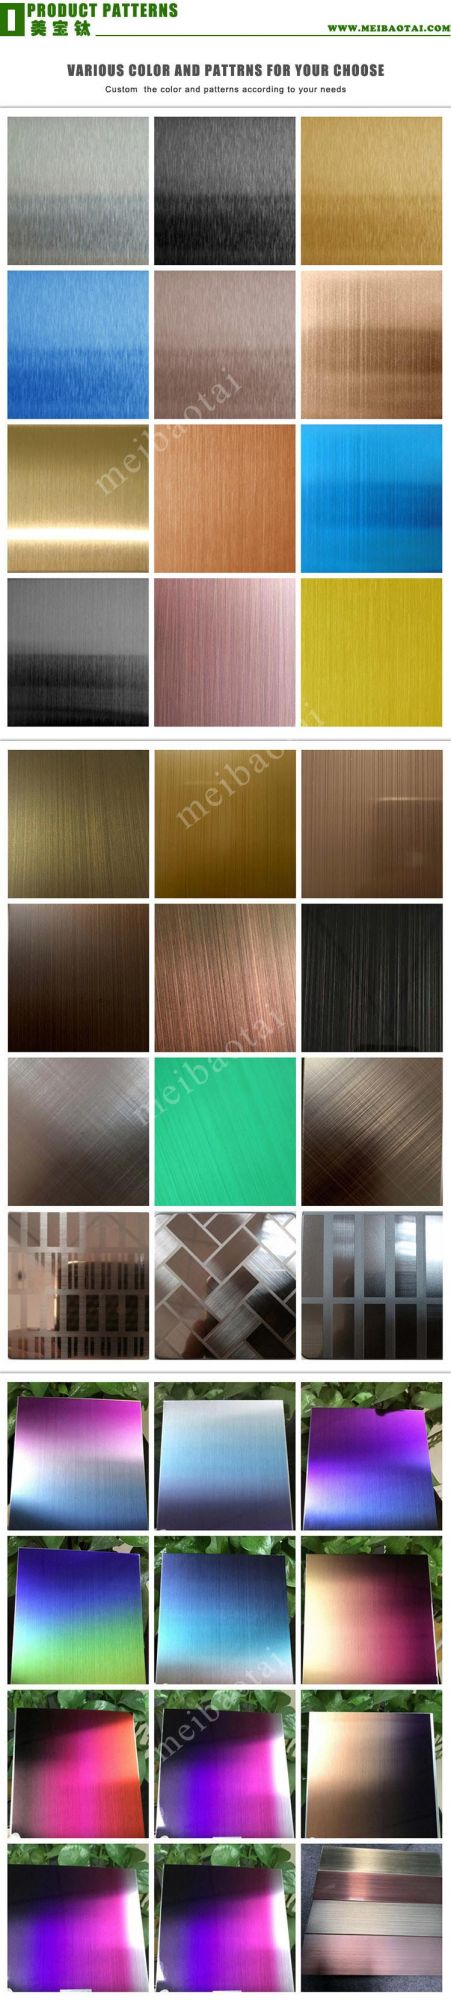 High Quality Brush Hairline No. 4 PVD Color Bronze Coating 1219X2438mm Decorative Hotel Wall Plate Grade 304 316 316L Stainless Steel Sheet